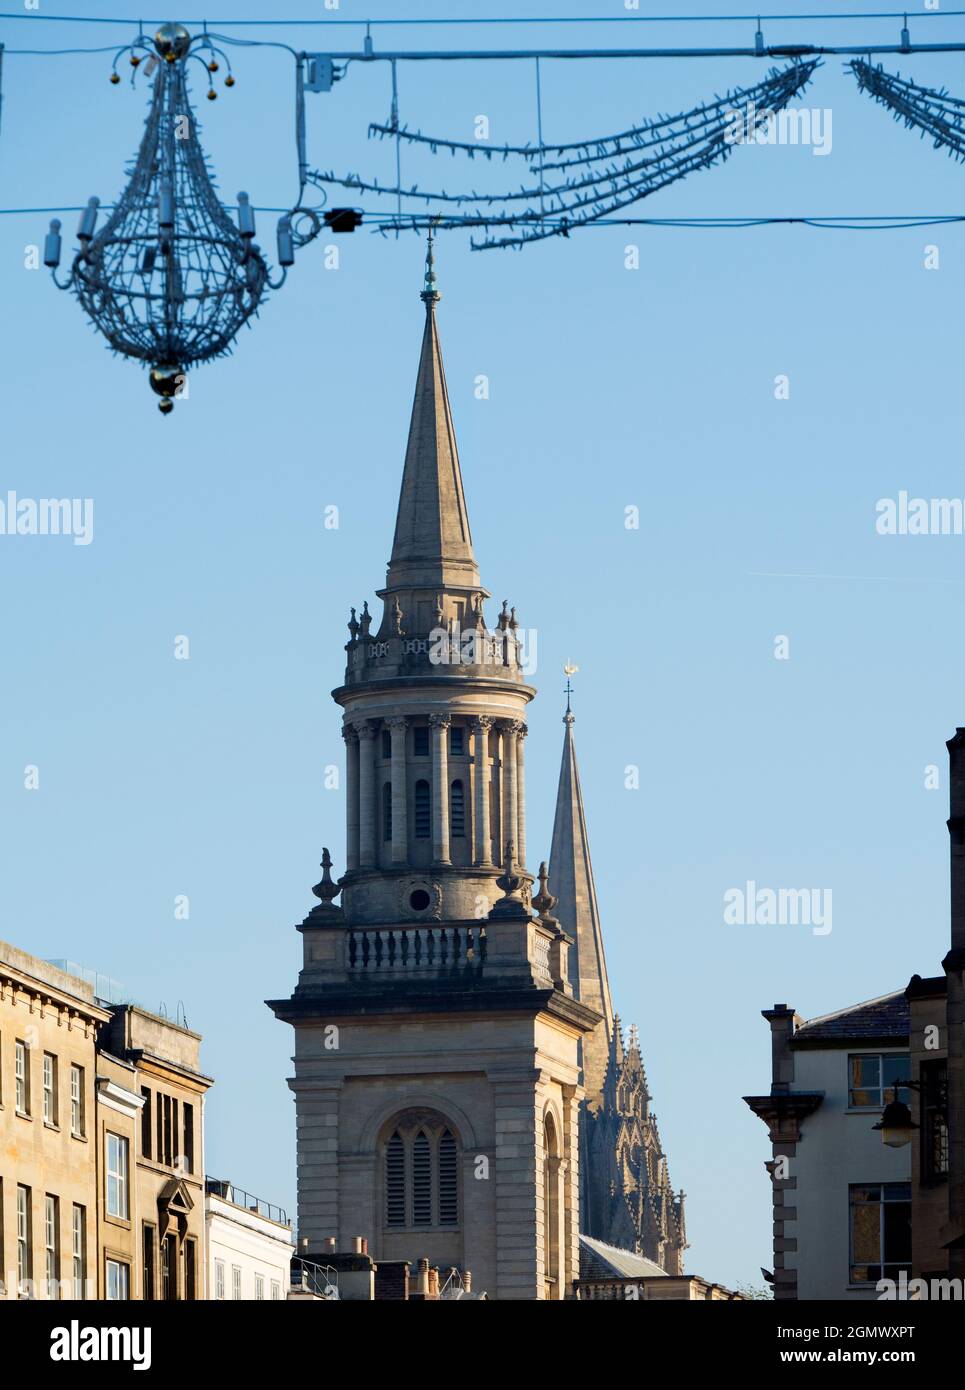 Oxford, England - 6 November 2017 Christmas decorations in Oxford High Street, with some of the city's famous dreaming spires in the background. We se Stock Photo